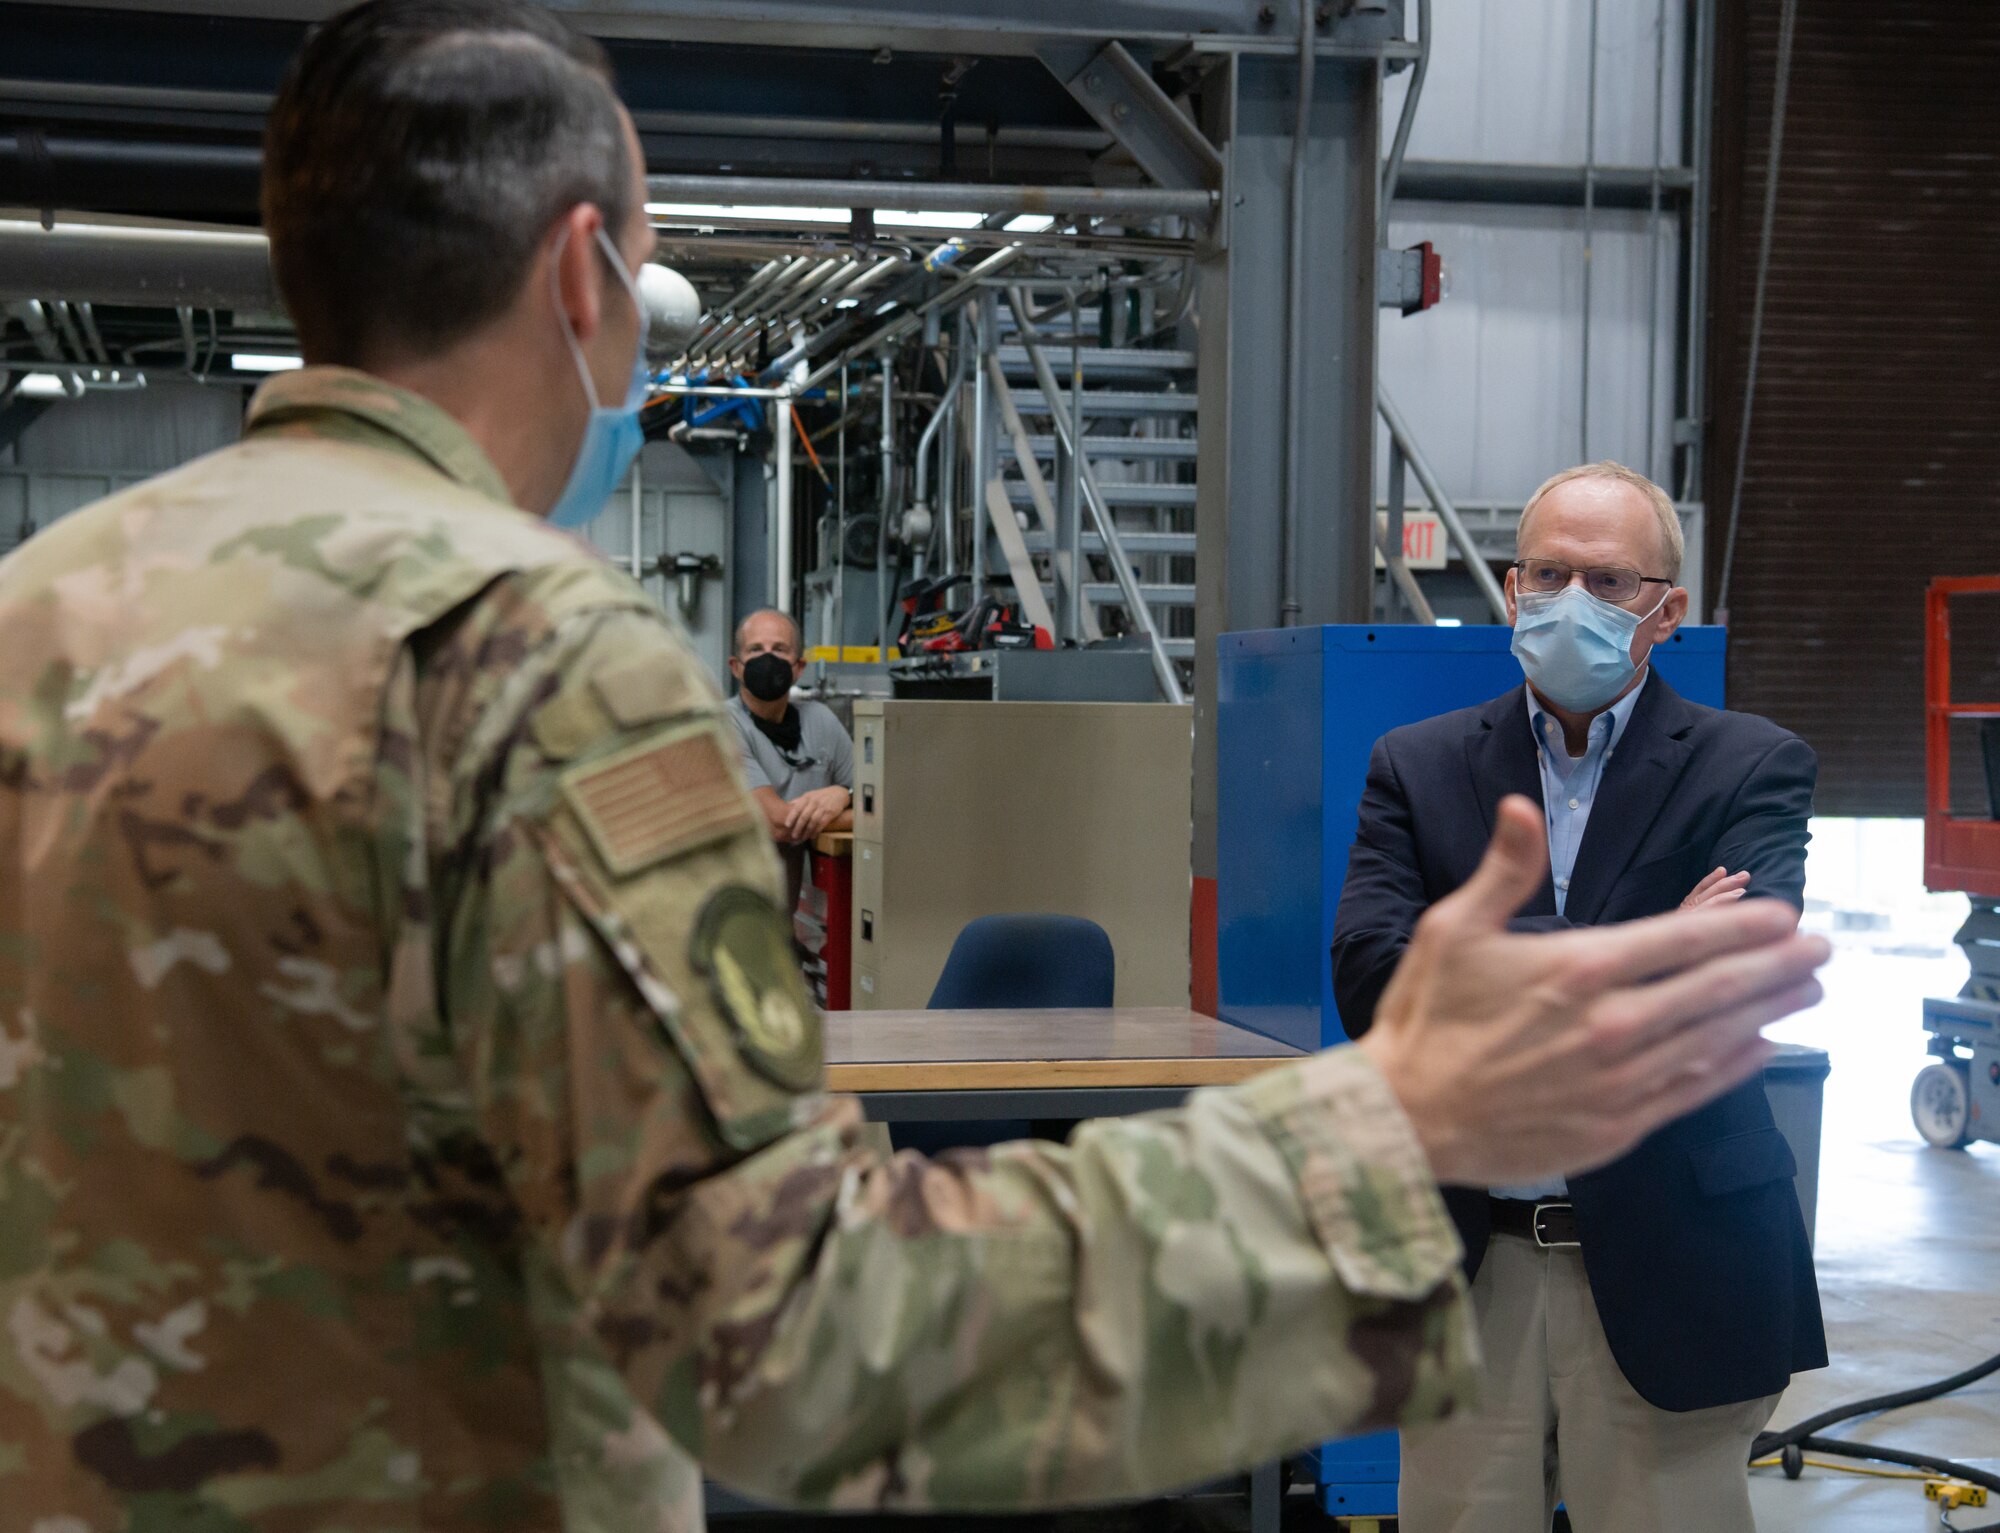 Rep. John Rose, of Tennessee, listens to Lt. Col. Lane Haubelt, chief of the Propulsion Test Branch, Test Division, Arnold Engineering Development Complex (AEDC), speak about the engine test capabilities the branch operates during the representative's visit to Arnold Air Force Base, Tenn., headquarters of AEDC, Aug. 31, 2021. Across the test cells on the base, the branch can support test and evaluation of performance, operability, aeromechanical, icing, corrosion, inlet pressure and temperature distortion, accelerated mission testing, engine-inlet dynamics, mission simulations and engine component testing. (U.S. Air Force photo by Jill Pickett)